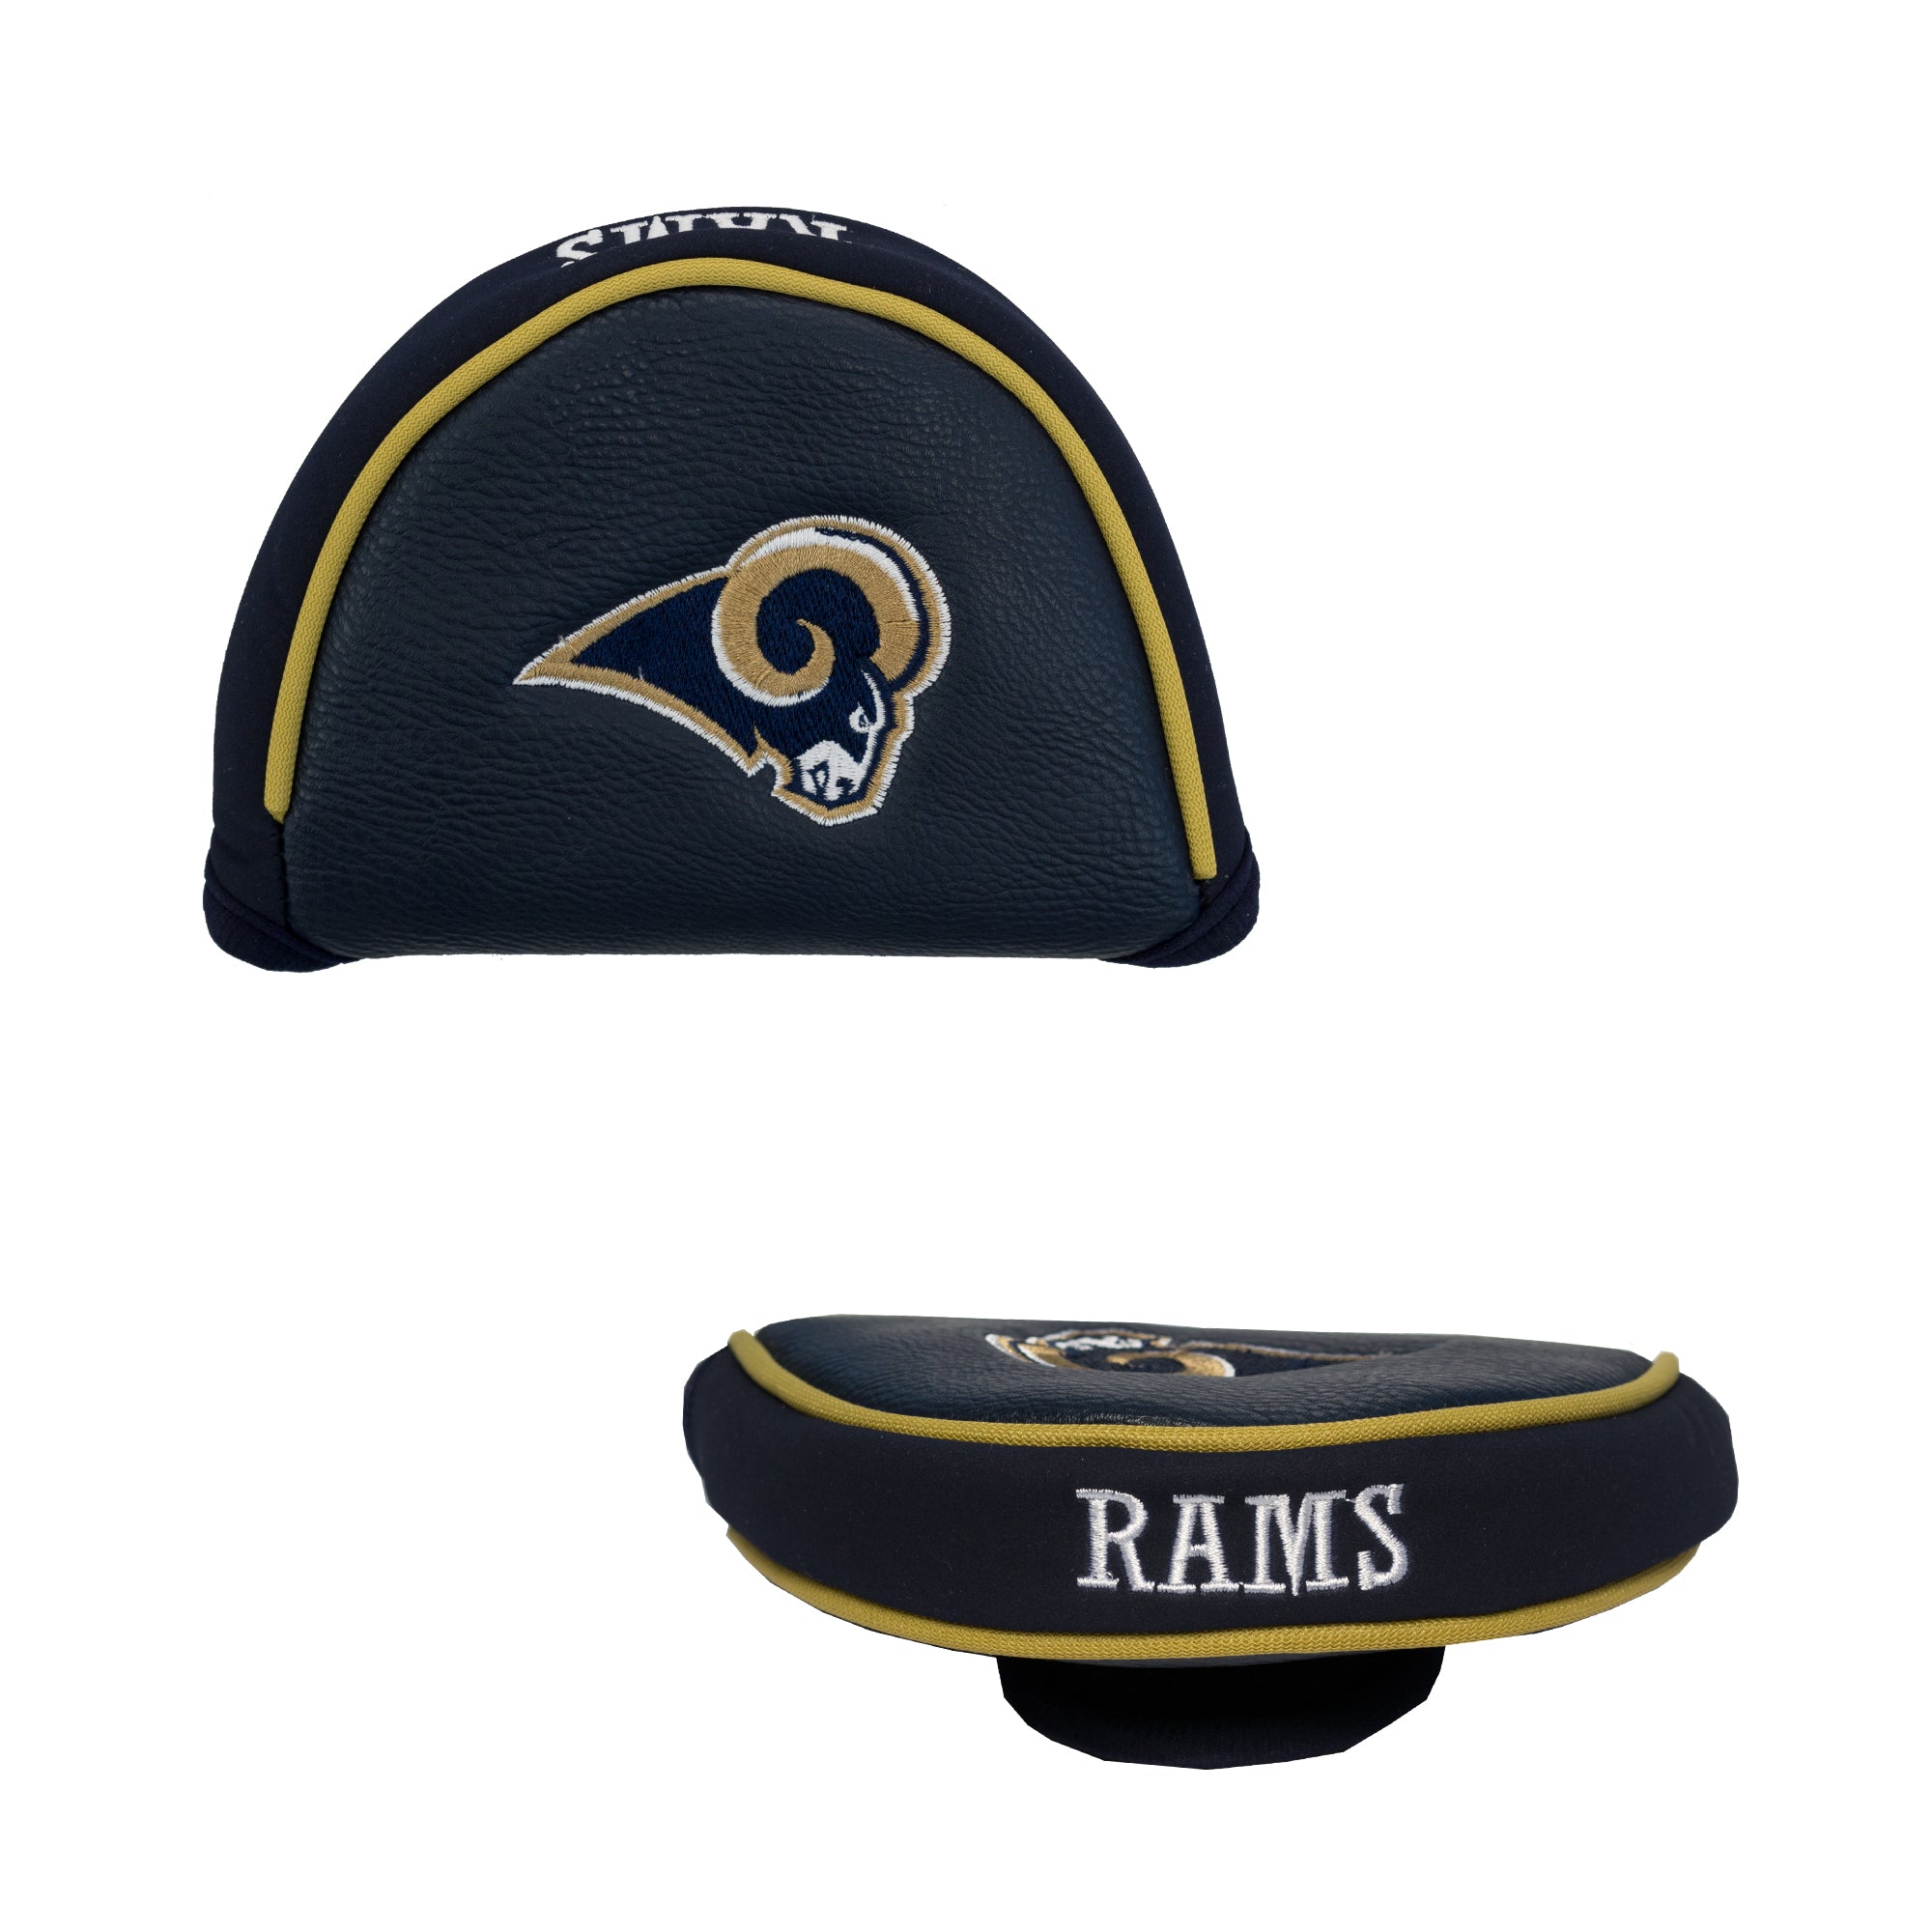 Los Angeles Rams Mallet Putter Cover